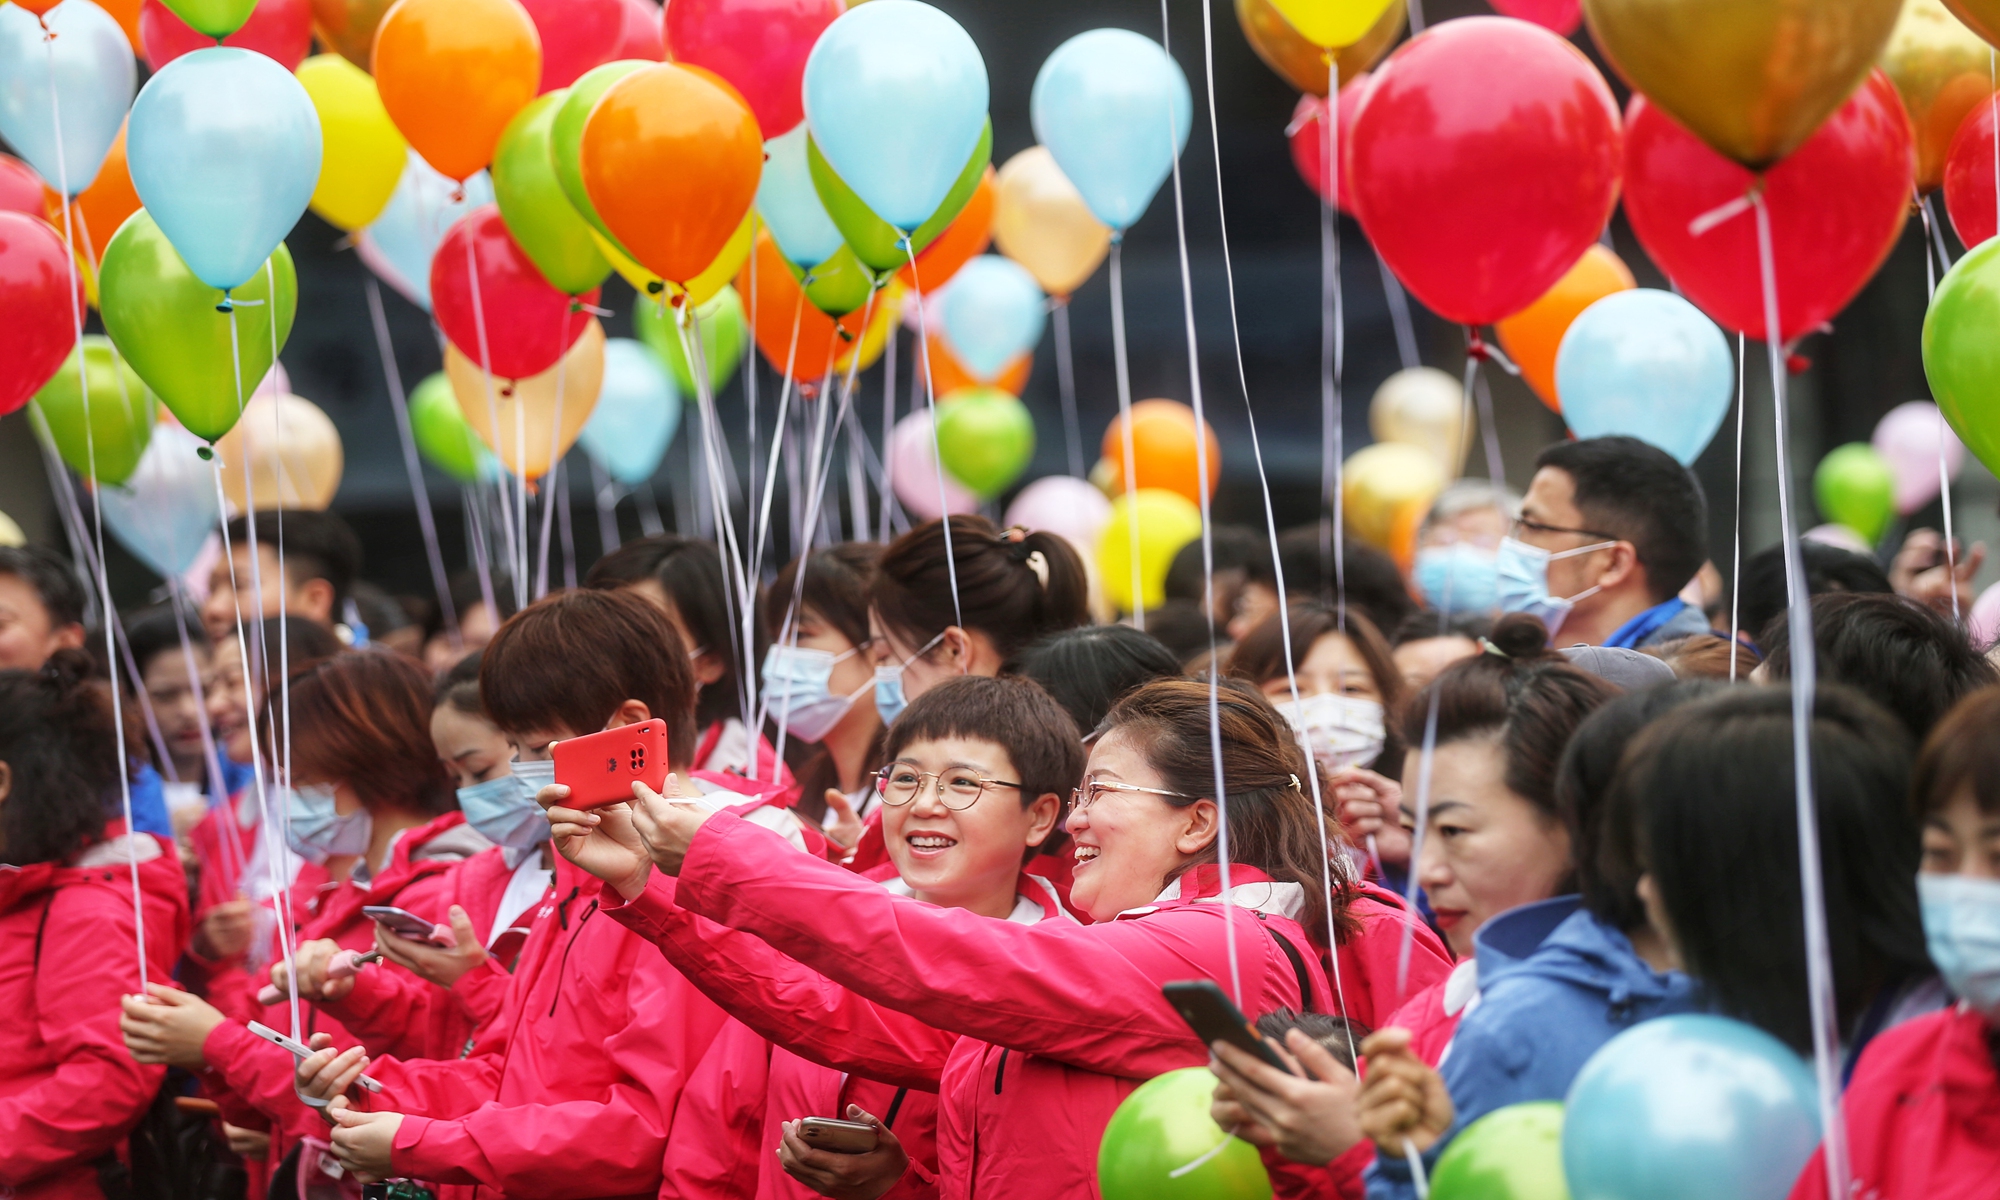 A group of medics take selfies in Wuhan on Sunday. As oriental cherries are in full blossom in Wuhan, more than 3,000 medical personnel who assisted Wuhan in the fight against COVID-19 in early 2020 return to the city along with their families as the guests of the city, where they visit Wuhan University,  believed to be one of the best places in China to enjoy the flowers to enjoy. Photo: Cui Meng/GT